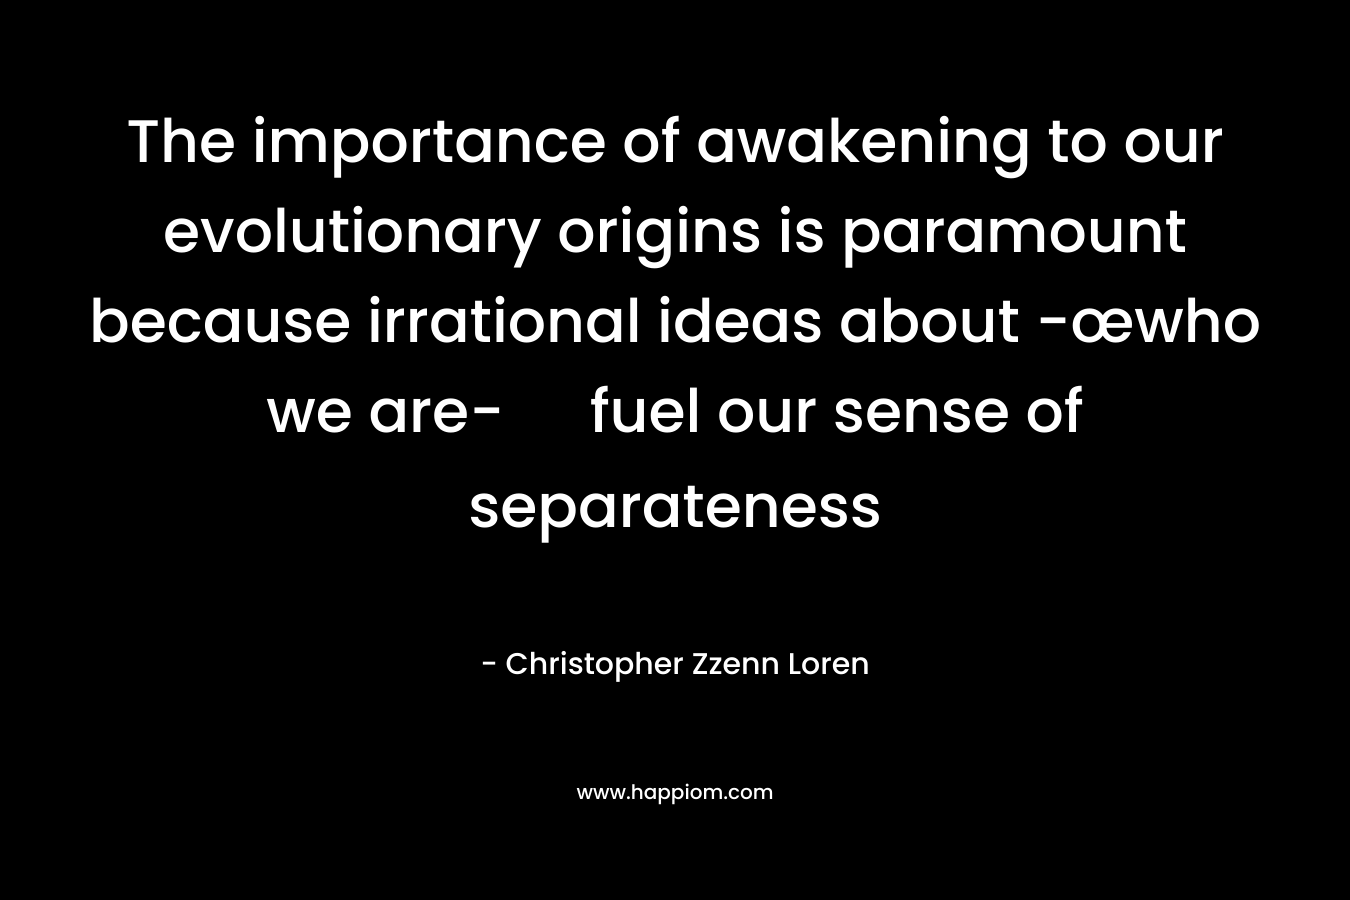 The importance of awakening to our evolutionary origins is paramount because irrational ideas about -œwho we are- fuel our sense of separateness